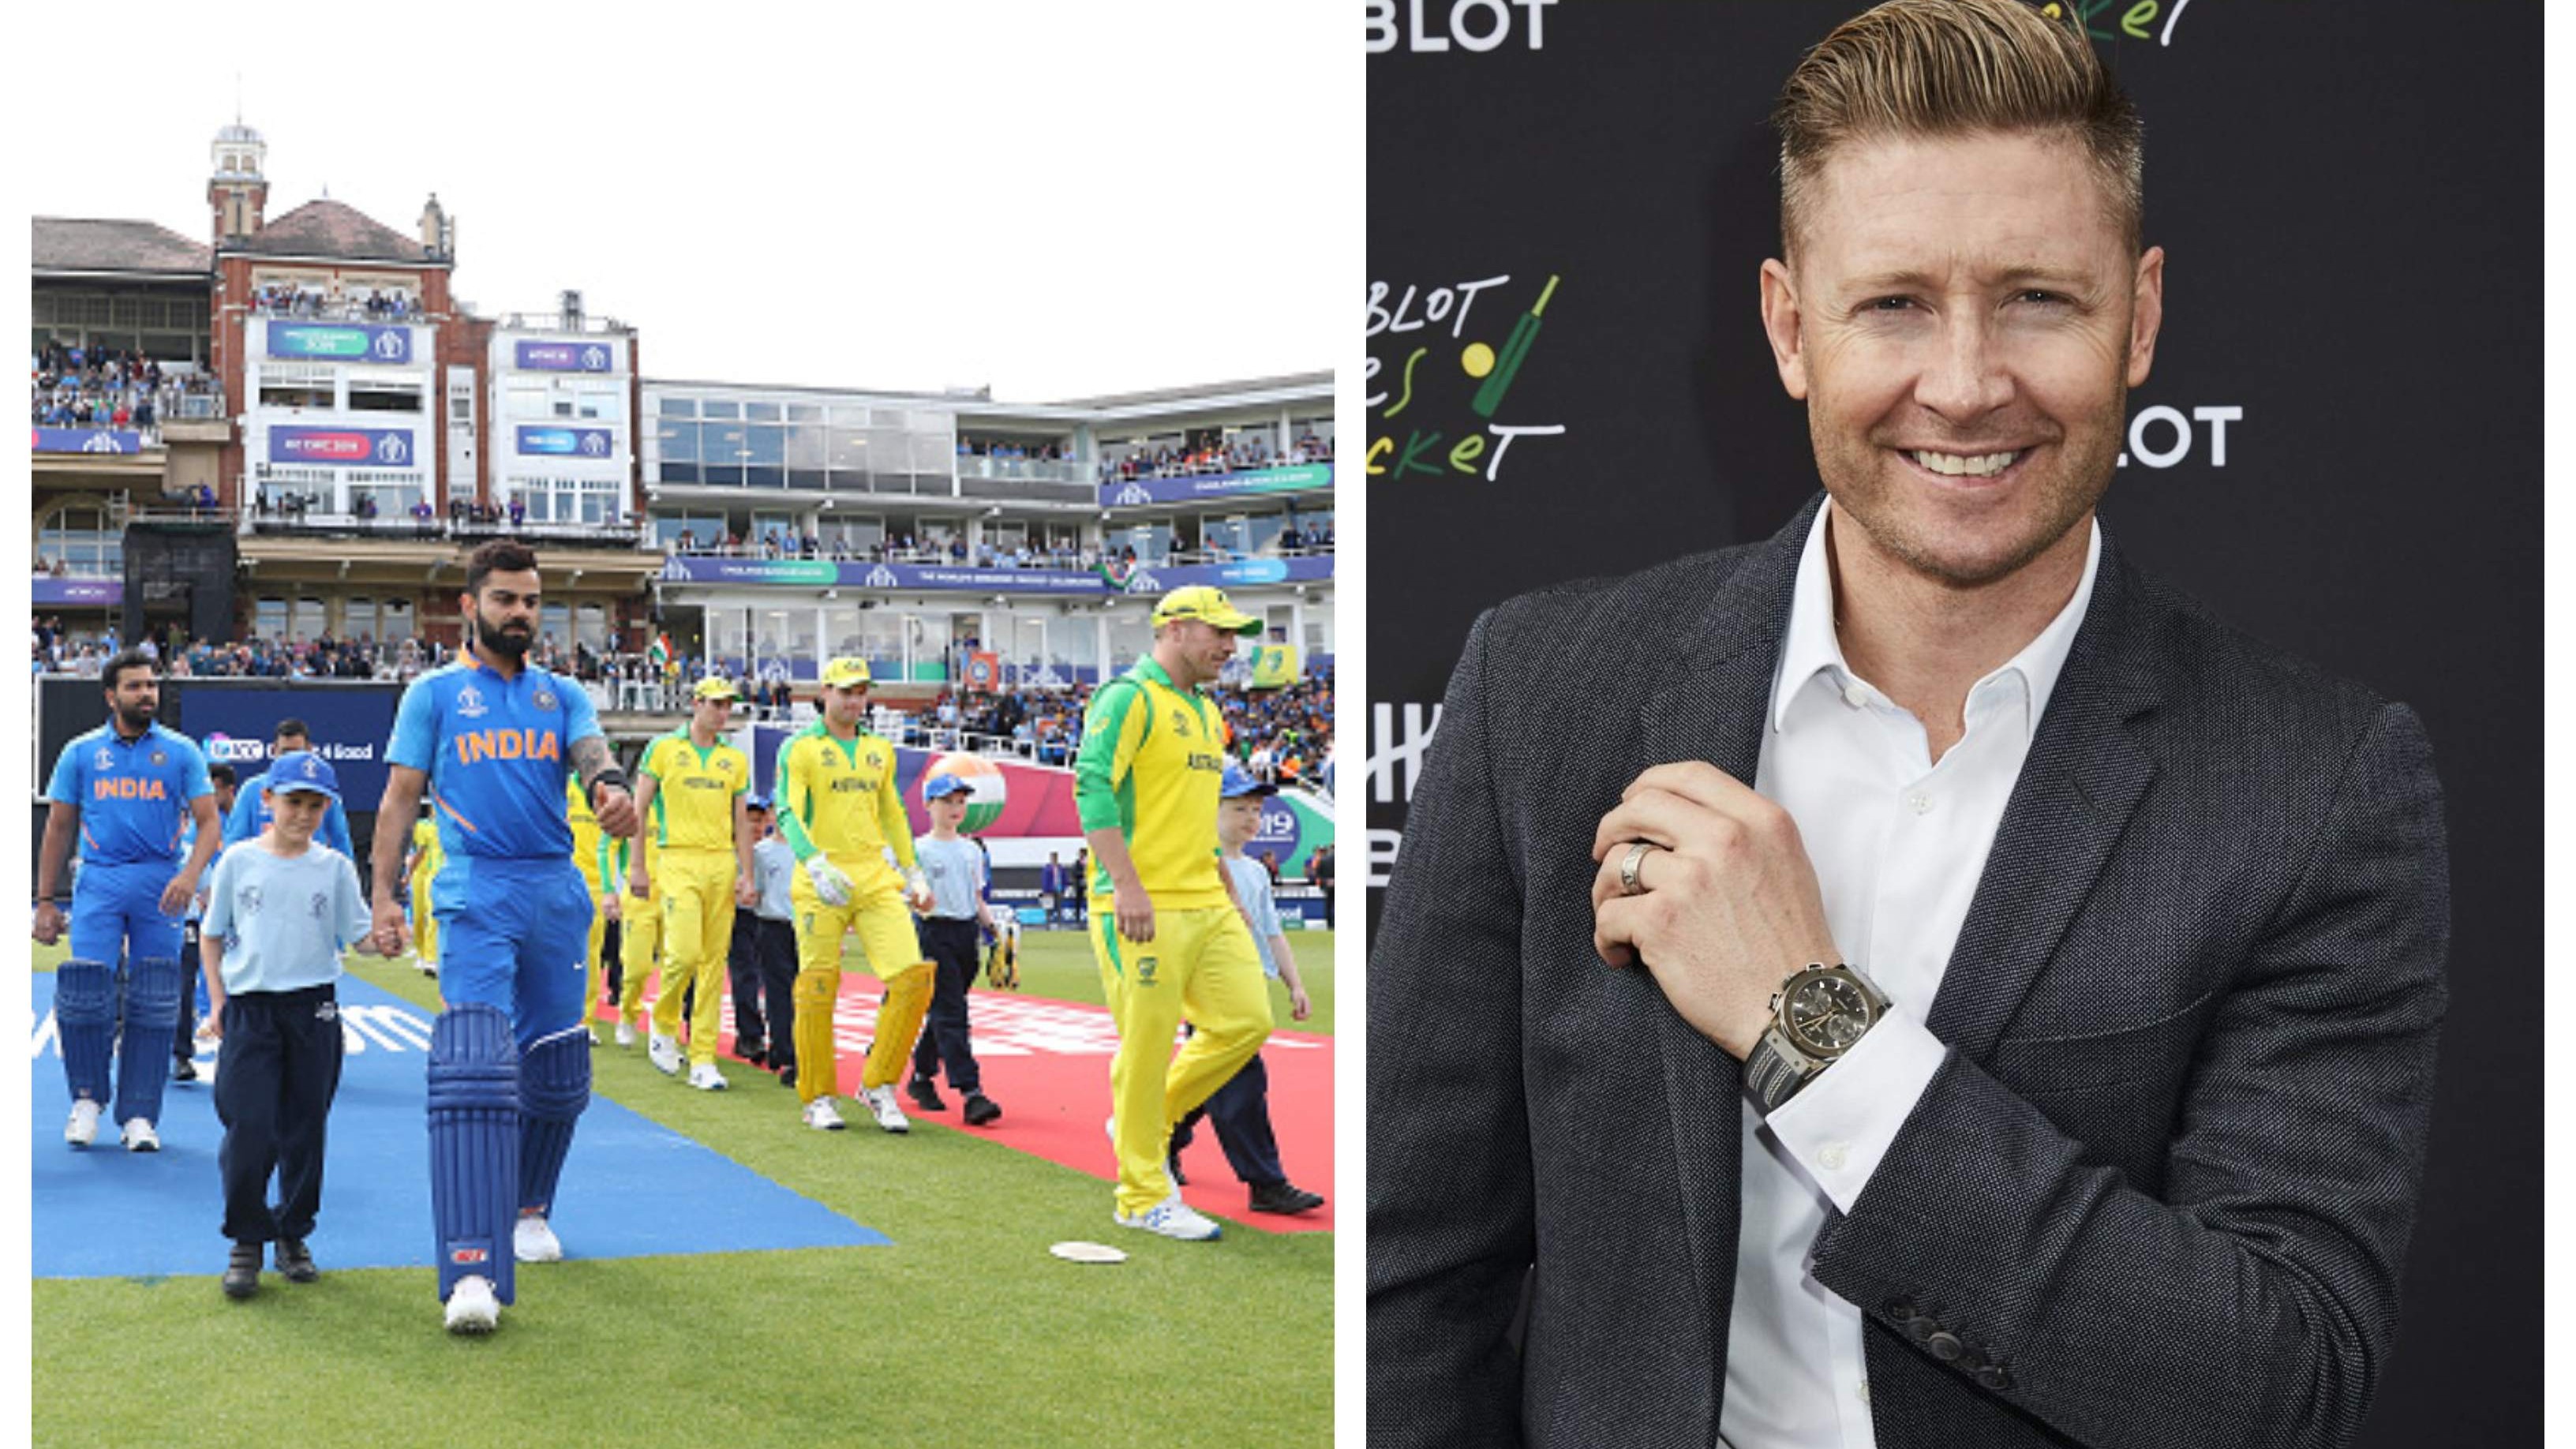 Australian players ‘sucked up’ to Kohli & his teammates to protect lucrative IPL deals: Michael Clarke